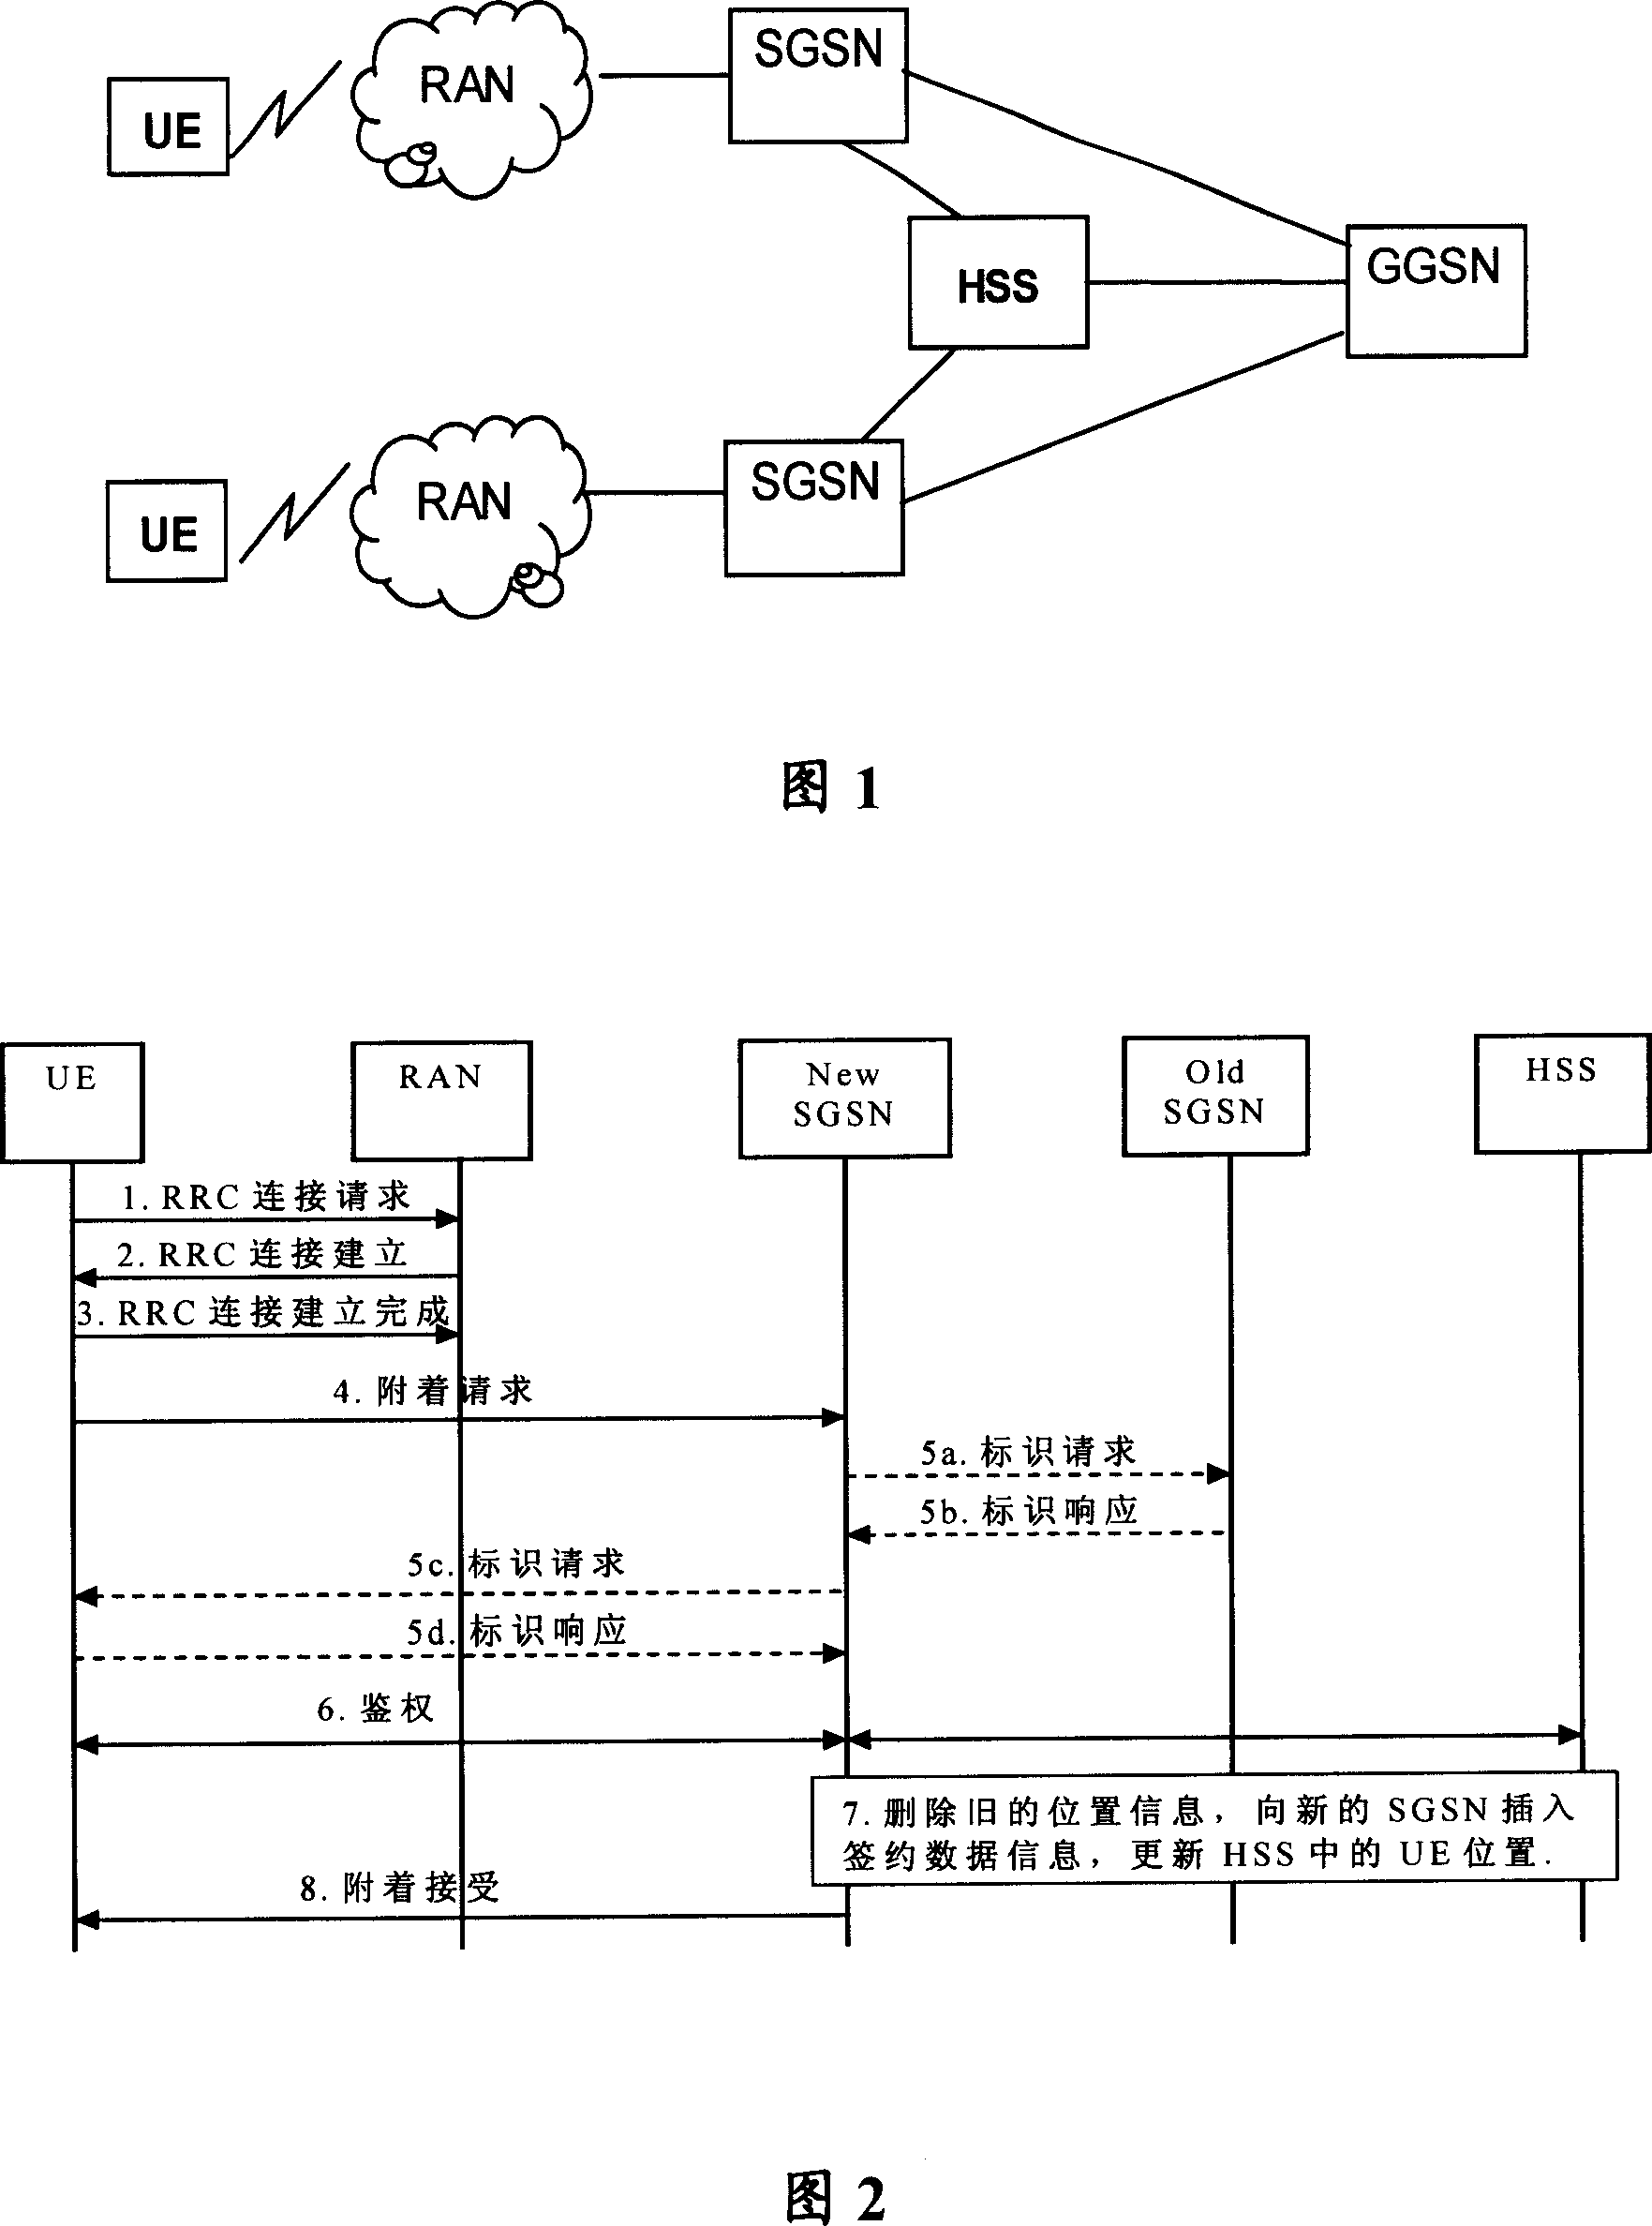 Method for power on and attachment access of the user device in the mobile communication system